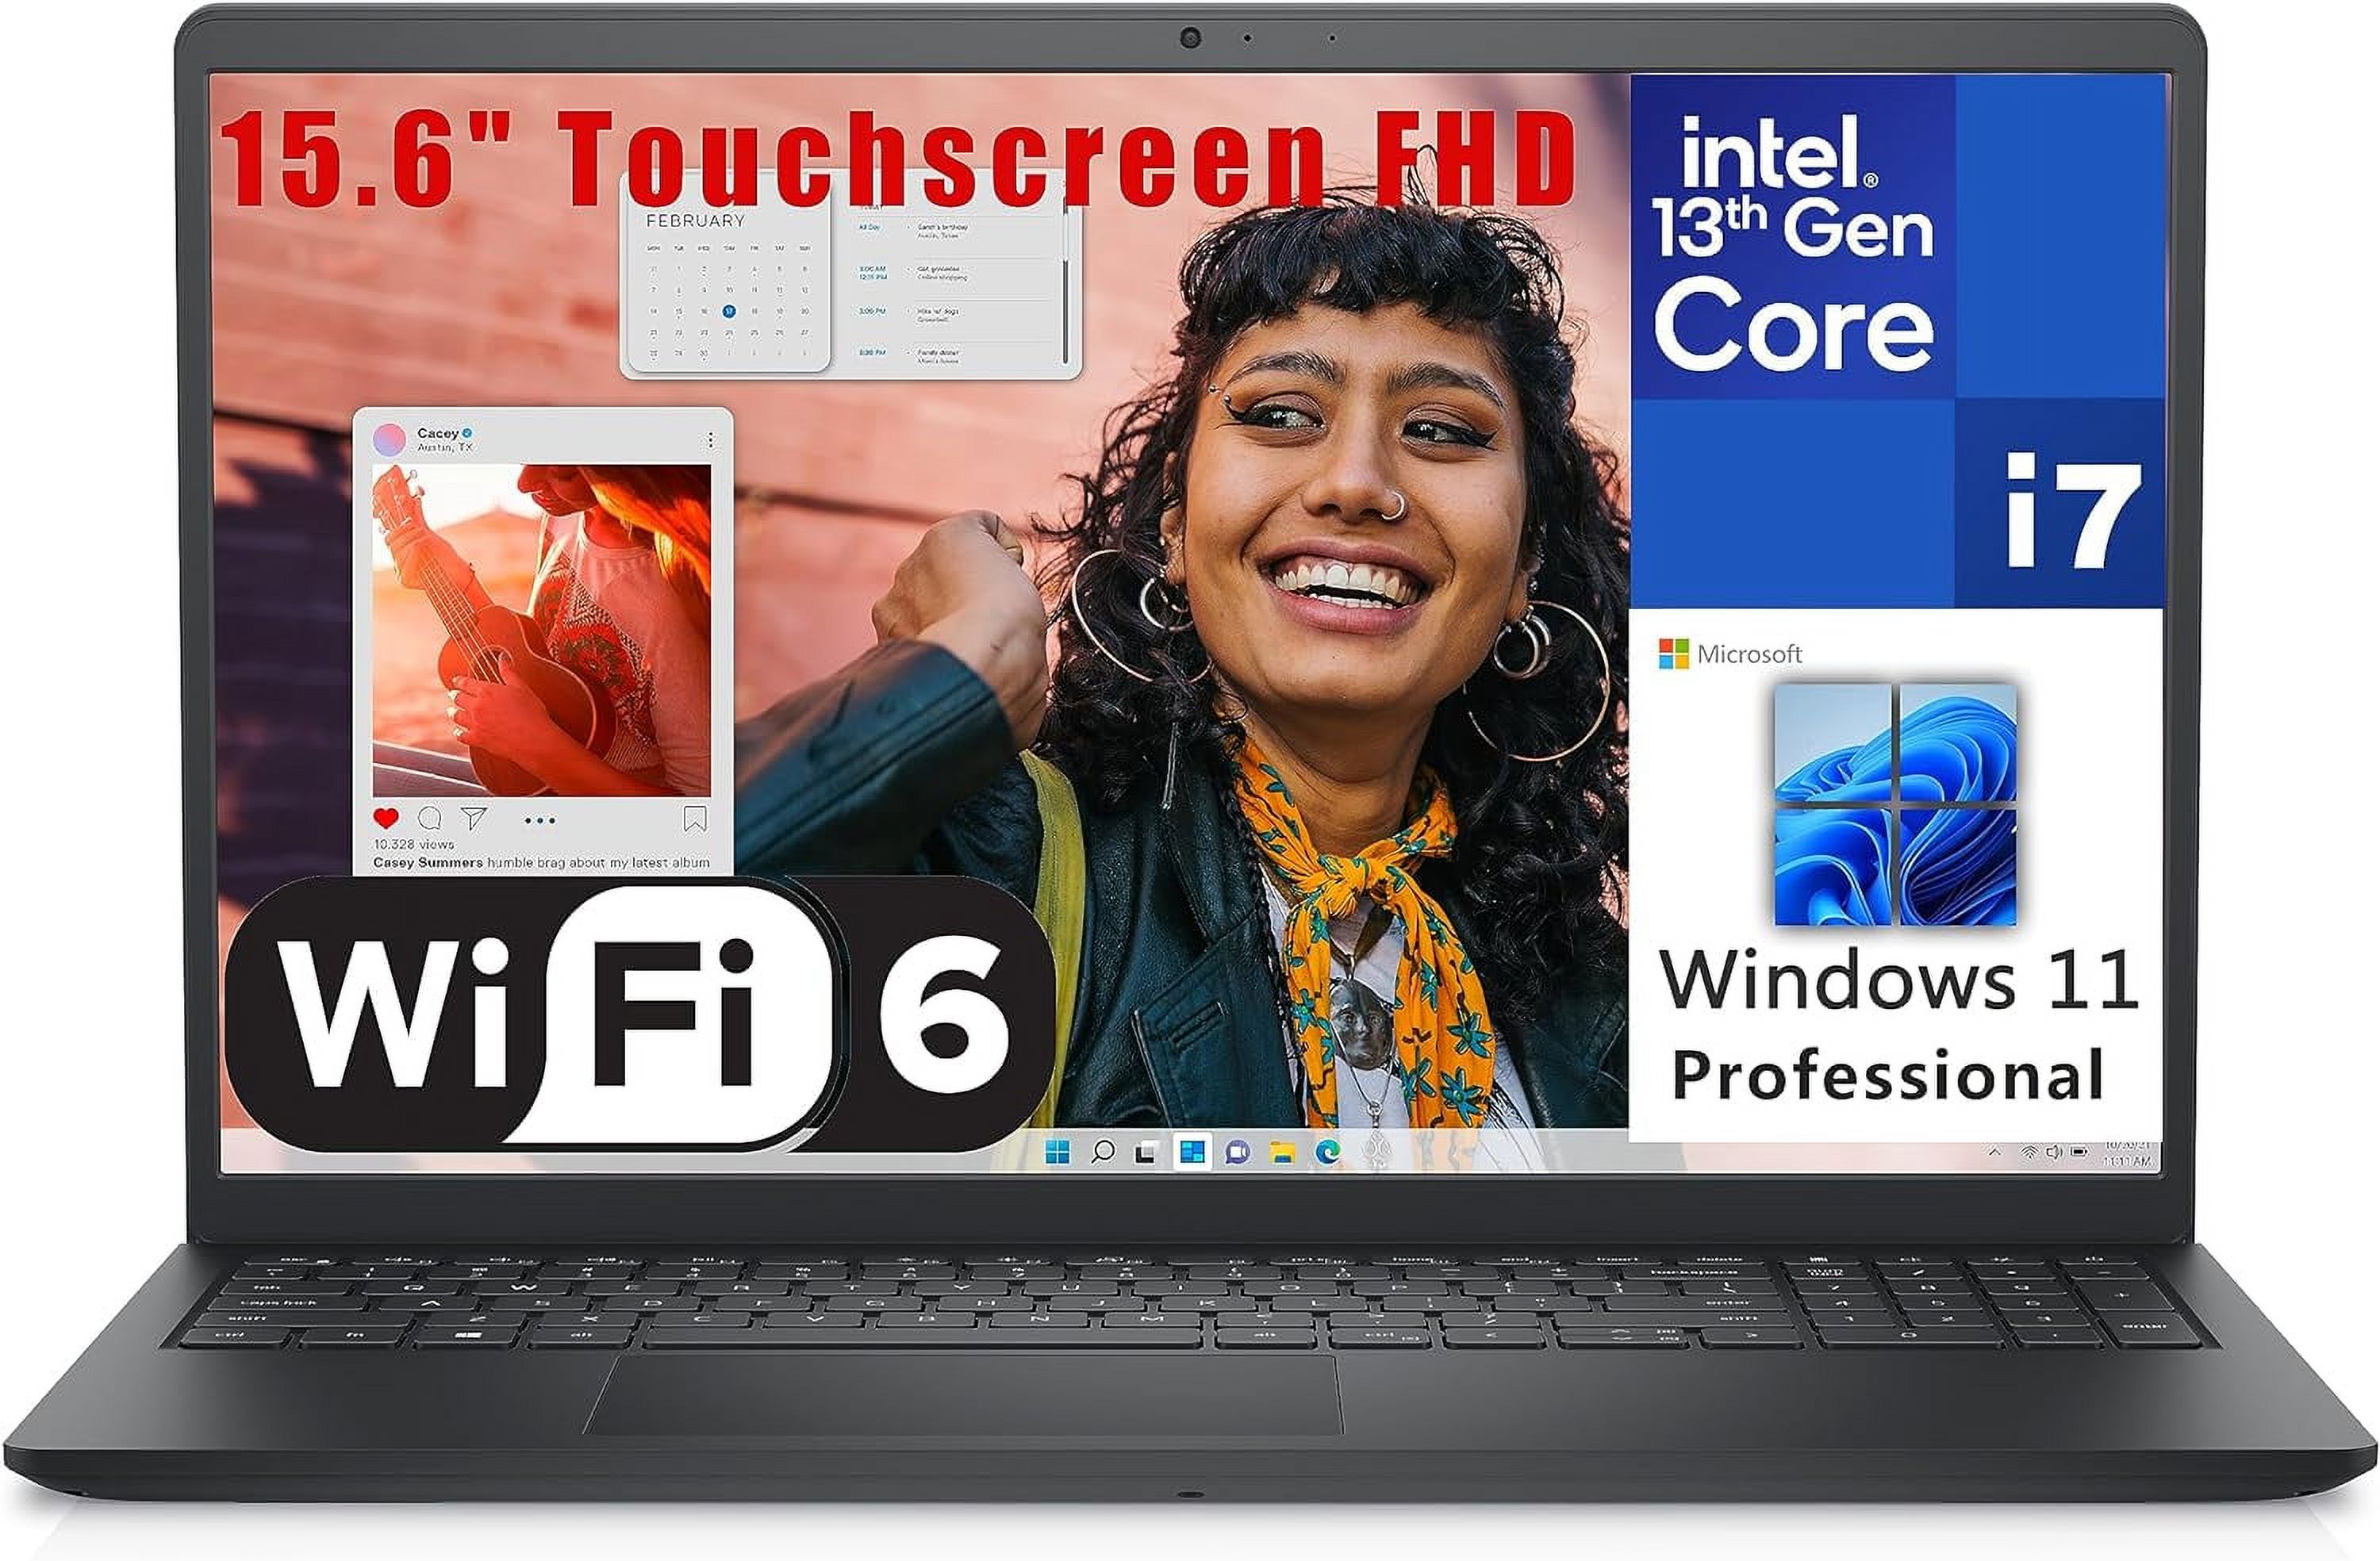 Dell 2023 Inspiron 15 3530 15.6" Touchscreen FHD Business Laptop Computer, 13th Gen Intel 10-Core i7-1355U up to 5.0GHz, 16GB DDR4 RAM, 512GB PCIe SSD, WiFi 6, Bluetooth, Carbon Black, Windows 11 Pro - image 2 of 6